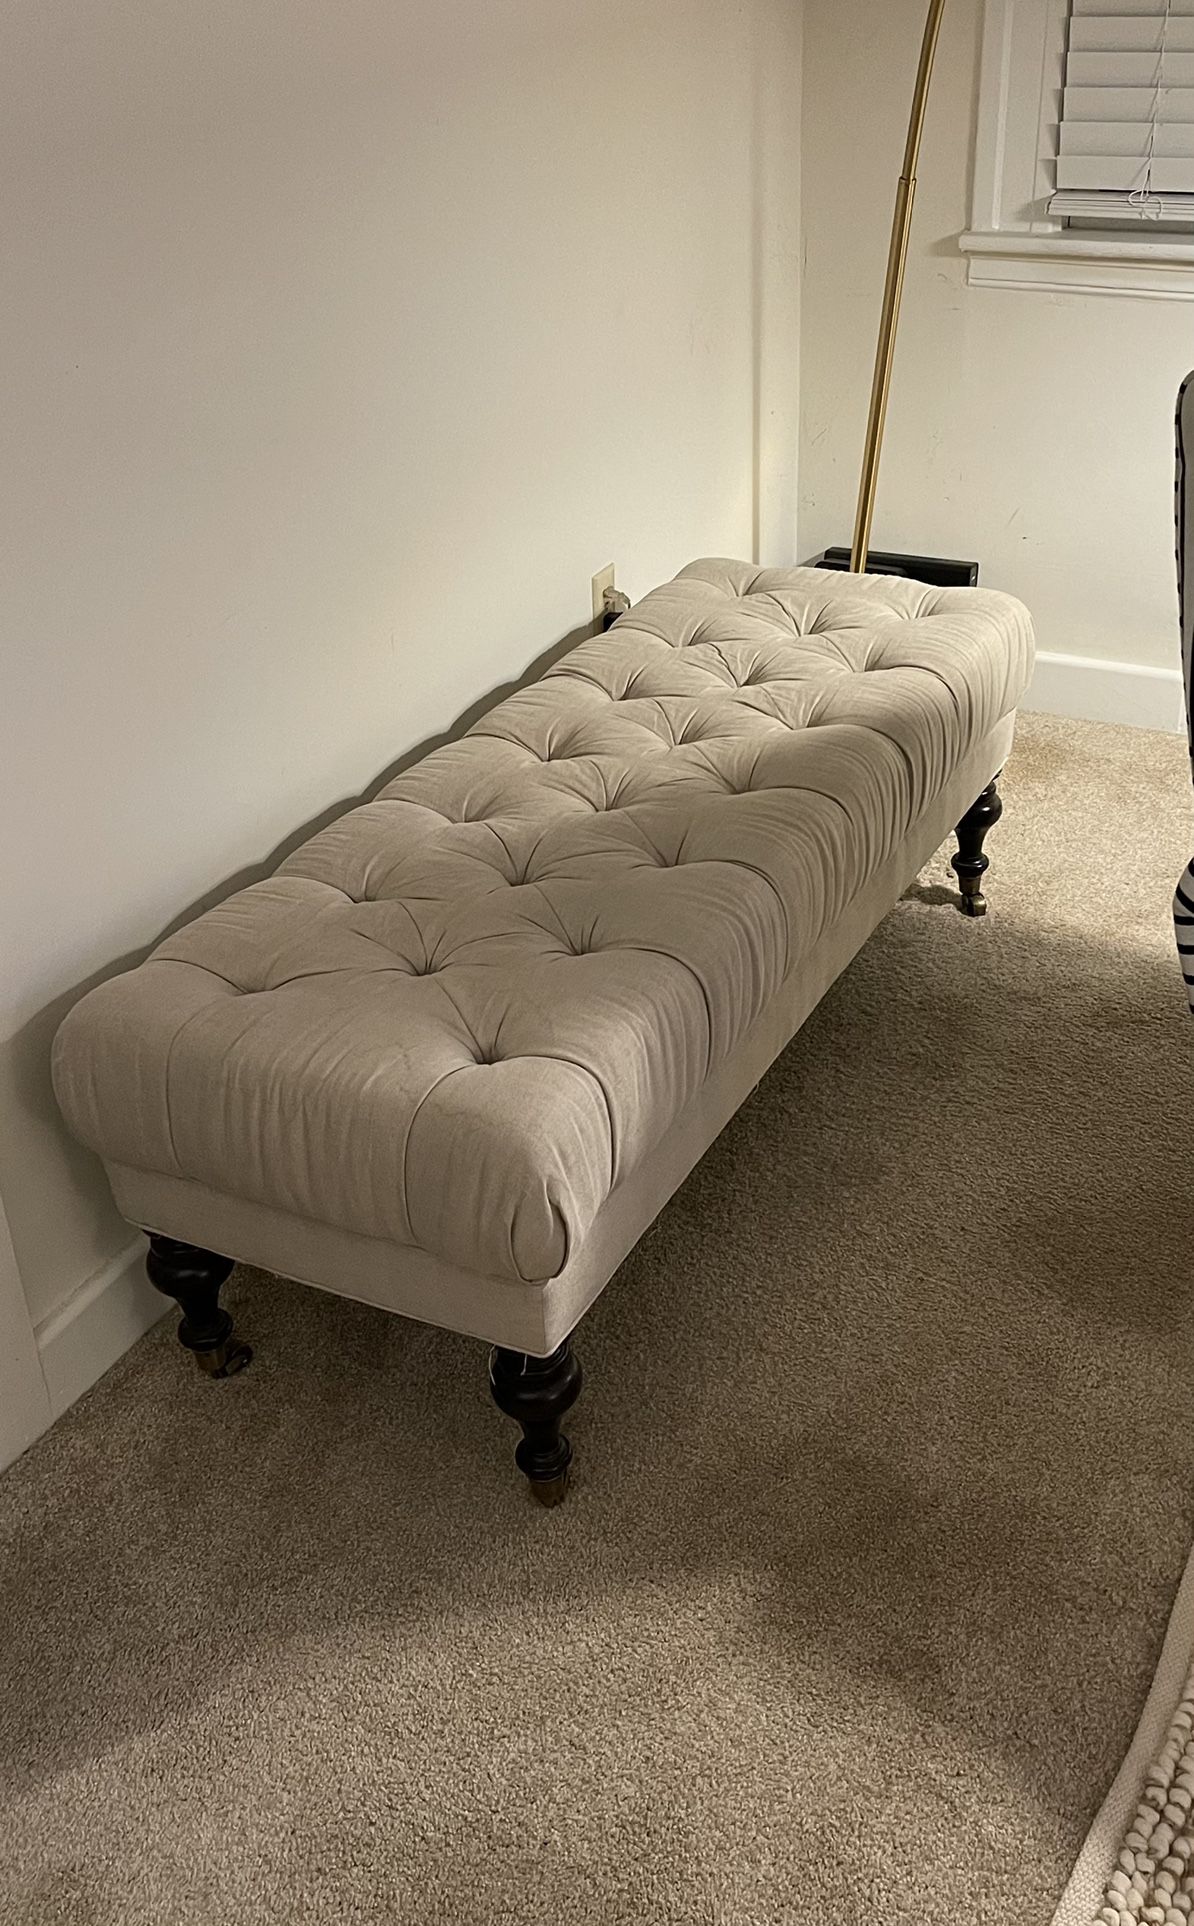 Tufted William Sonoma Home Bench/coffe Table